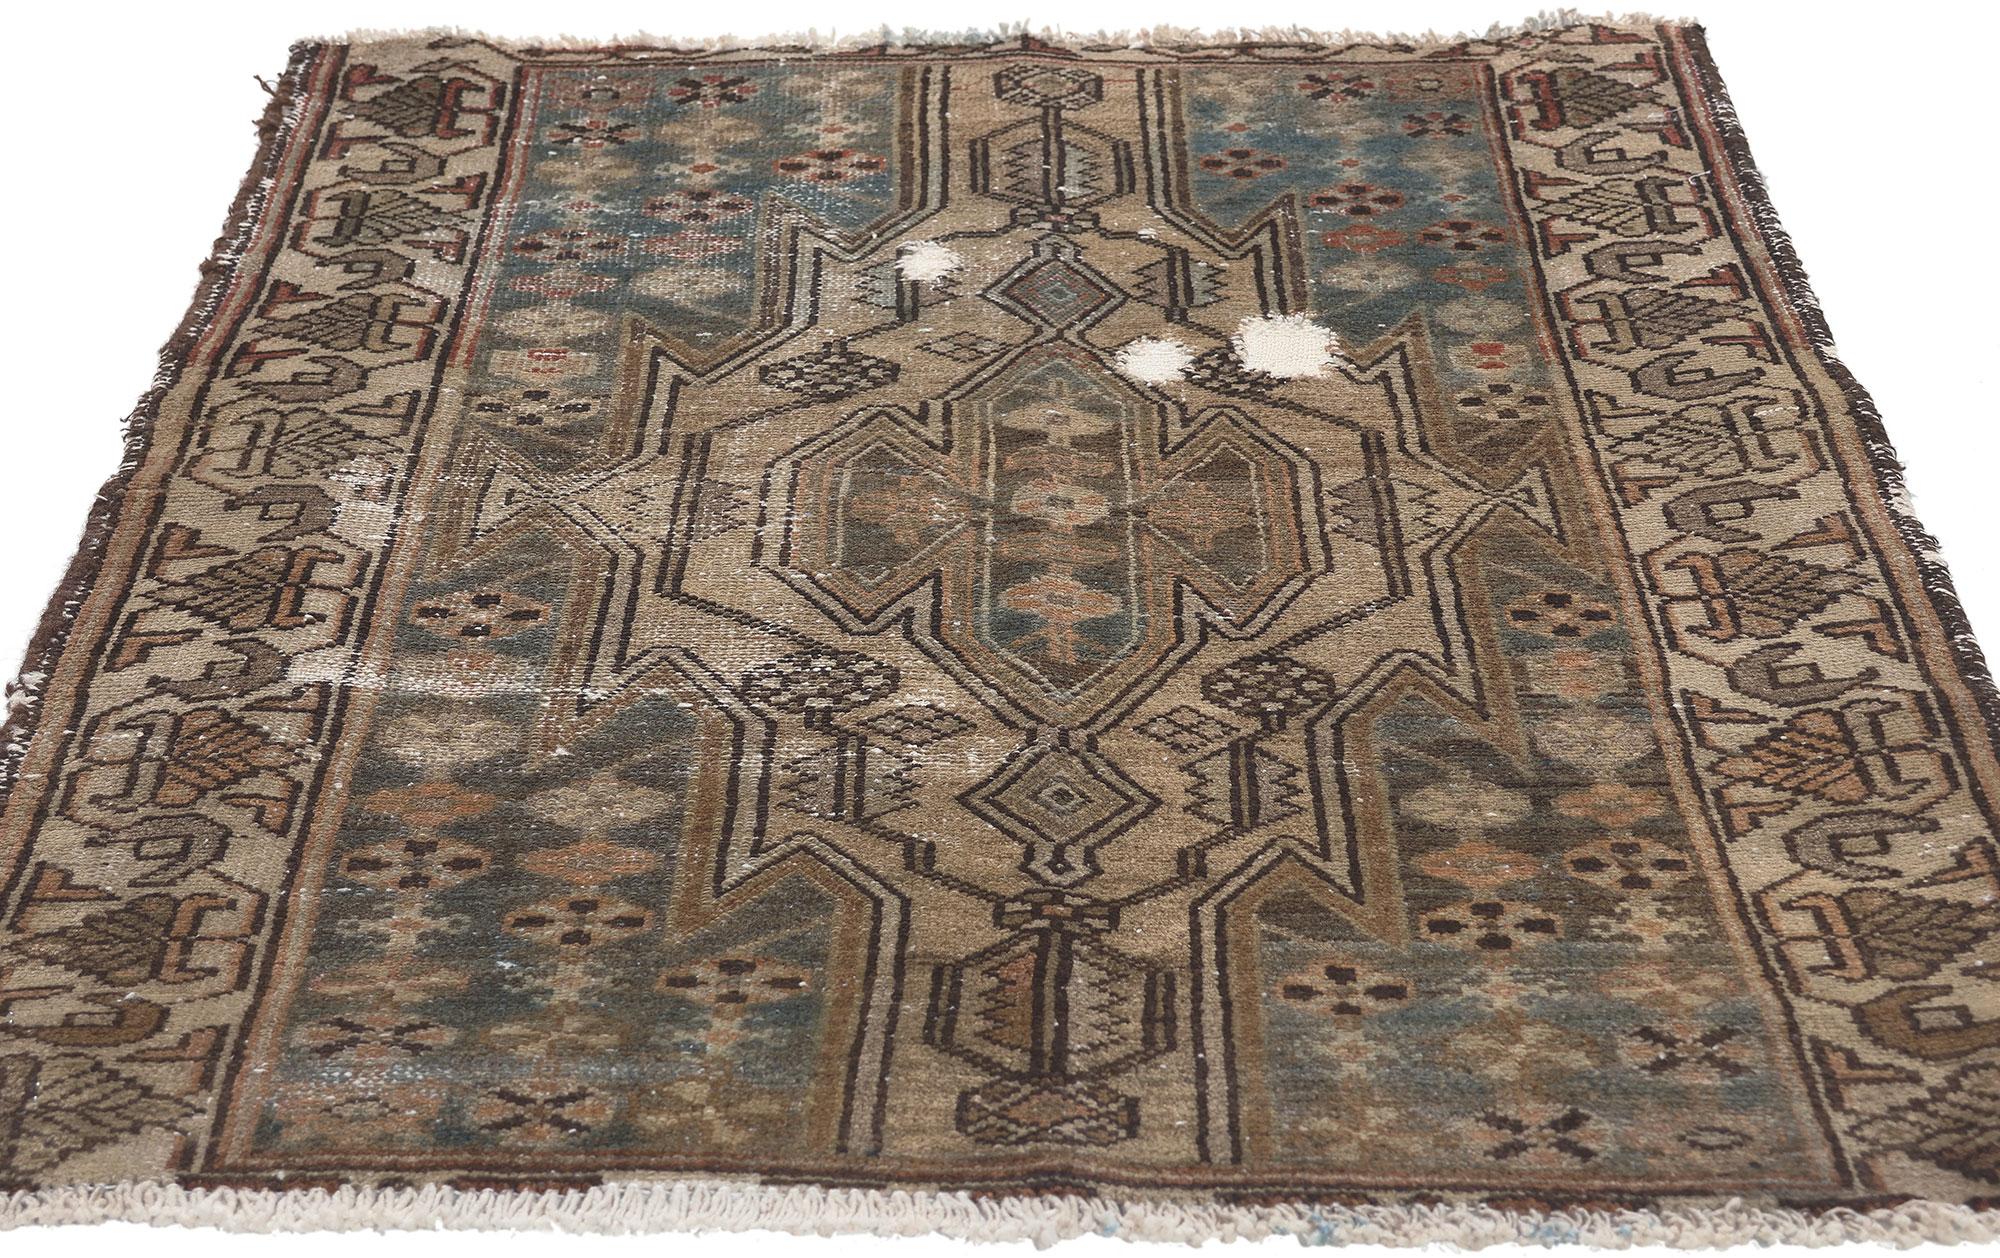 Rustic Antique Worn Persian Tribal Hamadan Rug, Rugged Beauty Meets Nomadic Charm For Sale